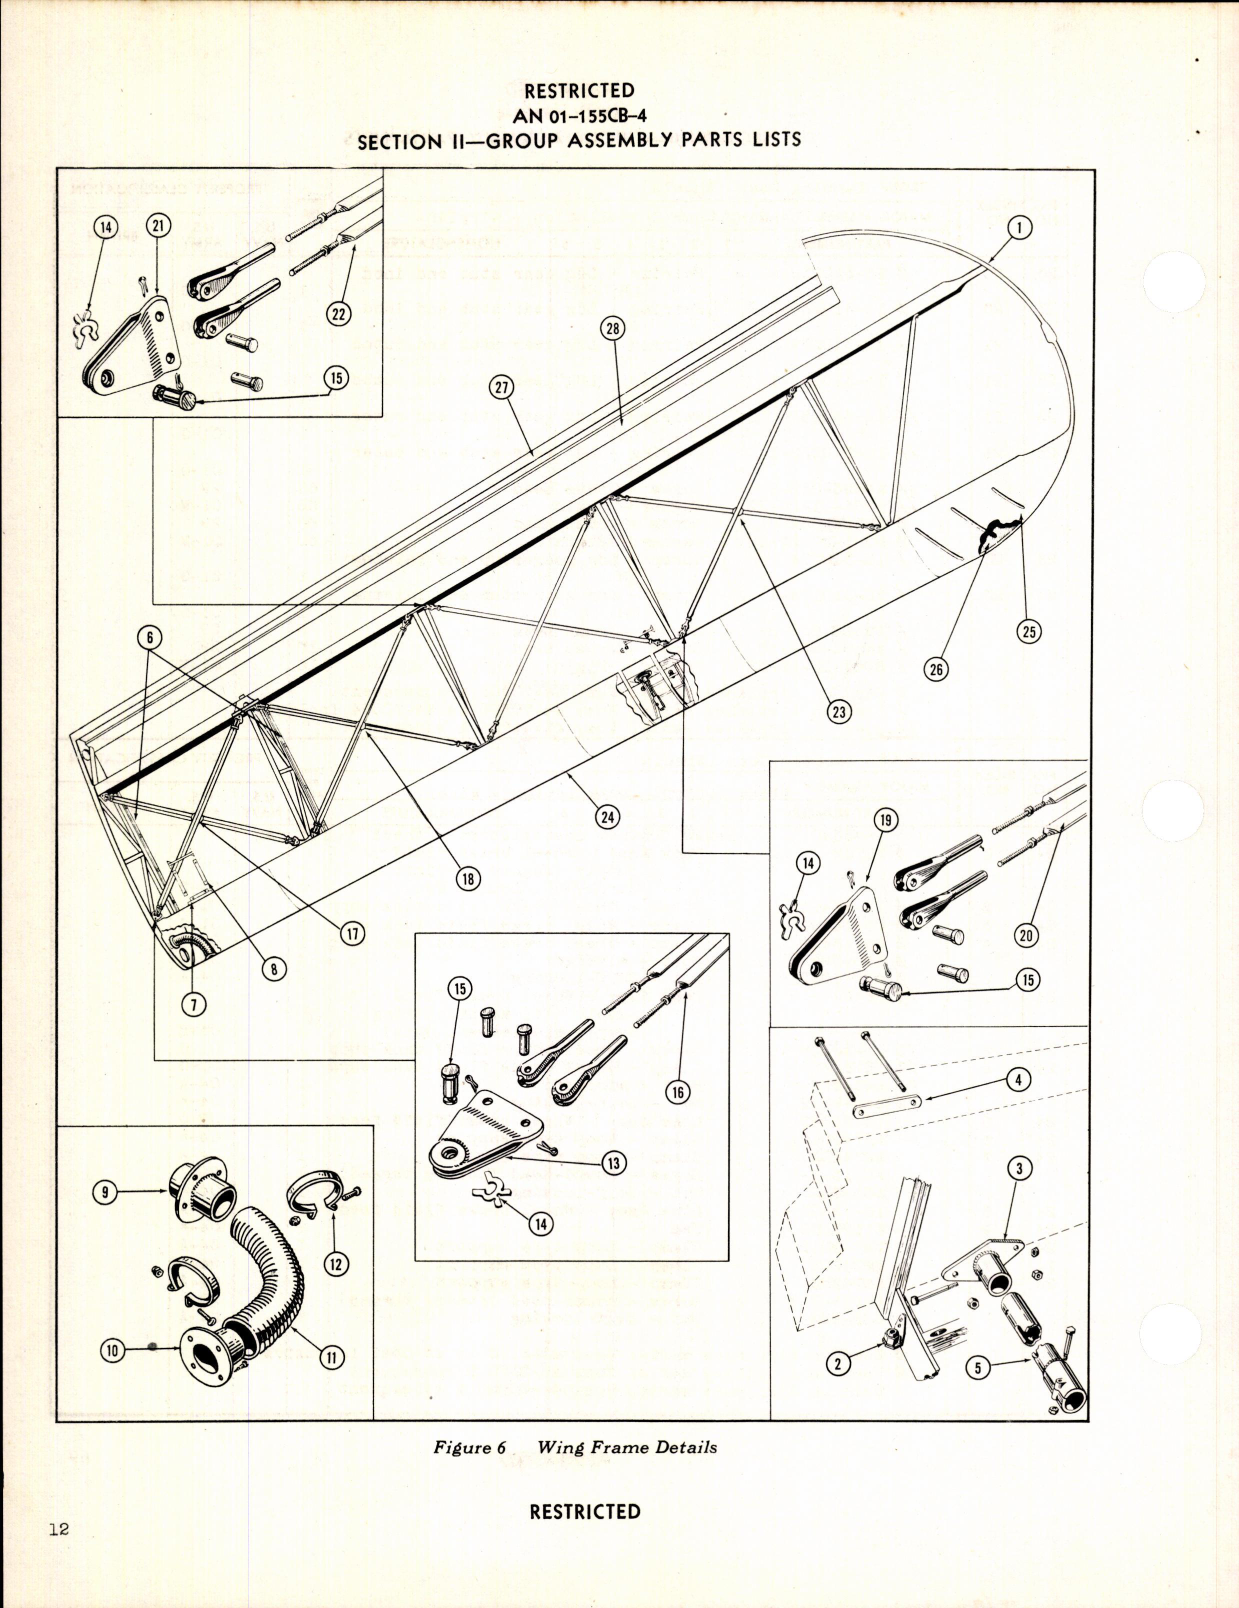 Sample page 6 from AirCorps Library document: Parts Catalog for C-64A Airplane